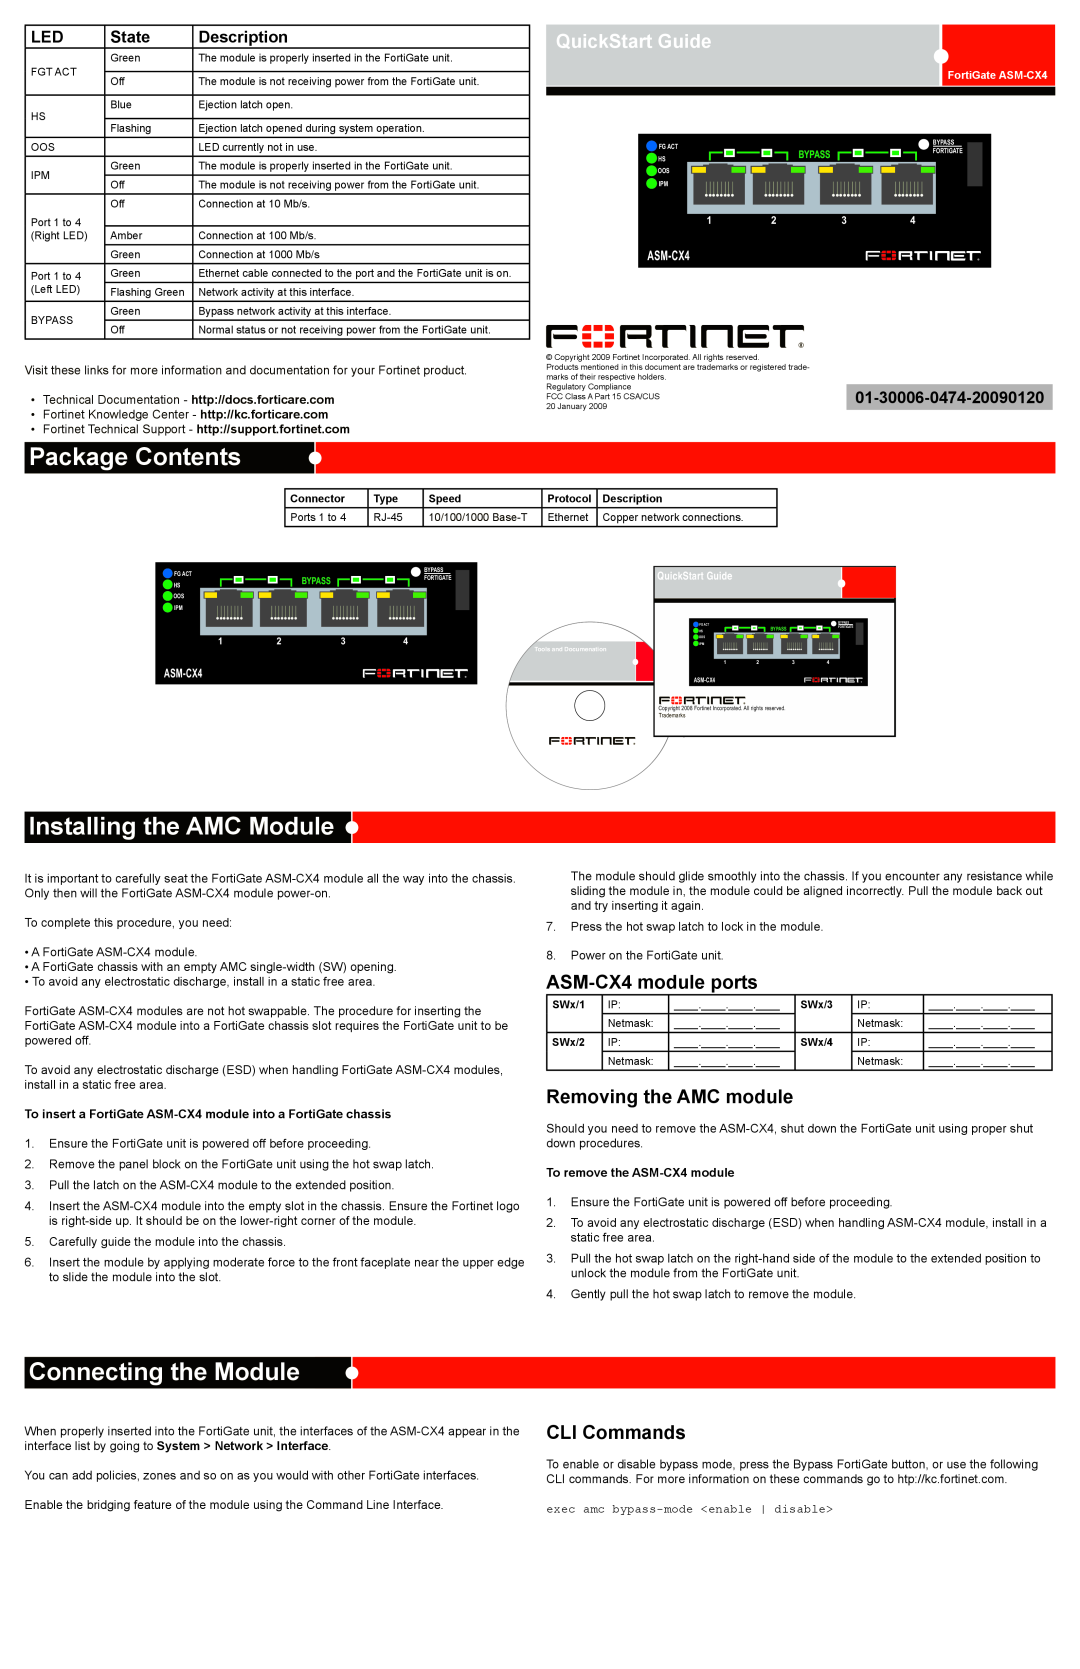 Fortinet ASM-CX4 quick start Package Contents, Installing the AMC Module, Connecting the Module, QuickStart Guide, State 